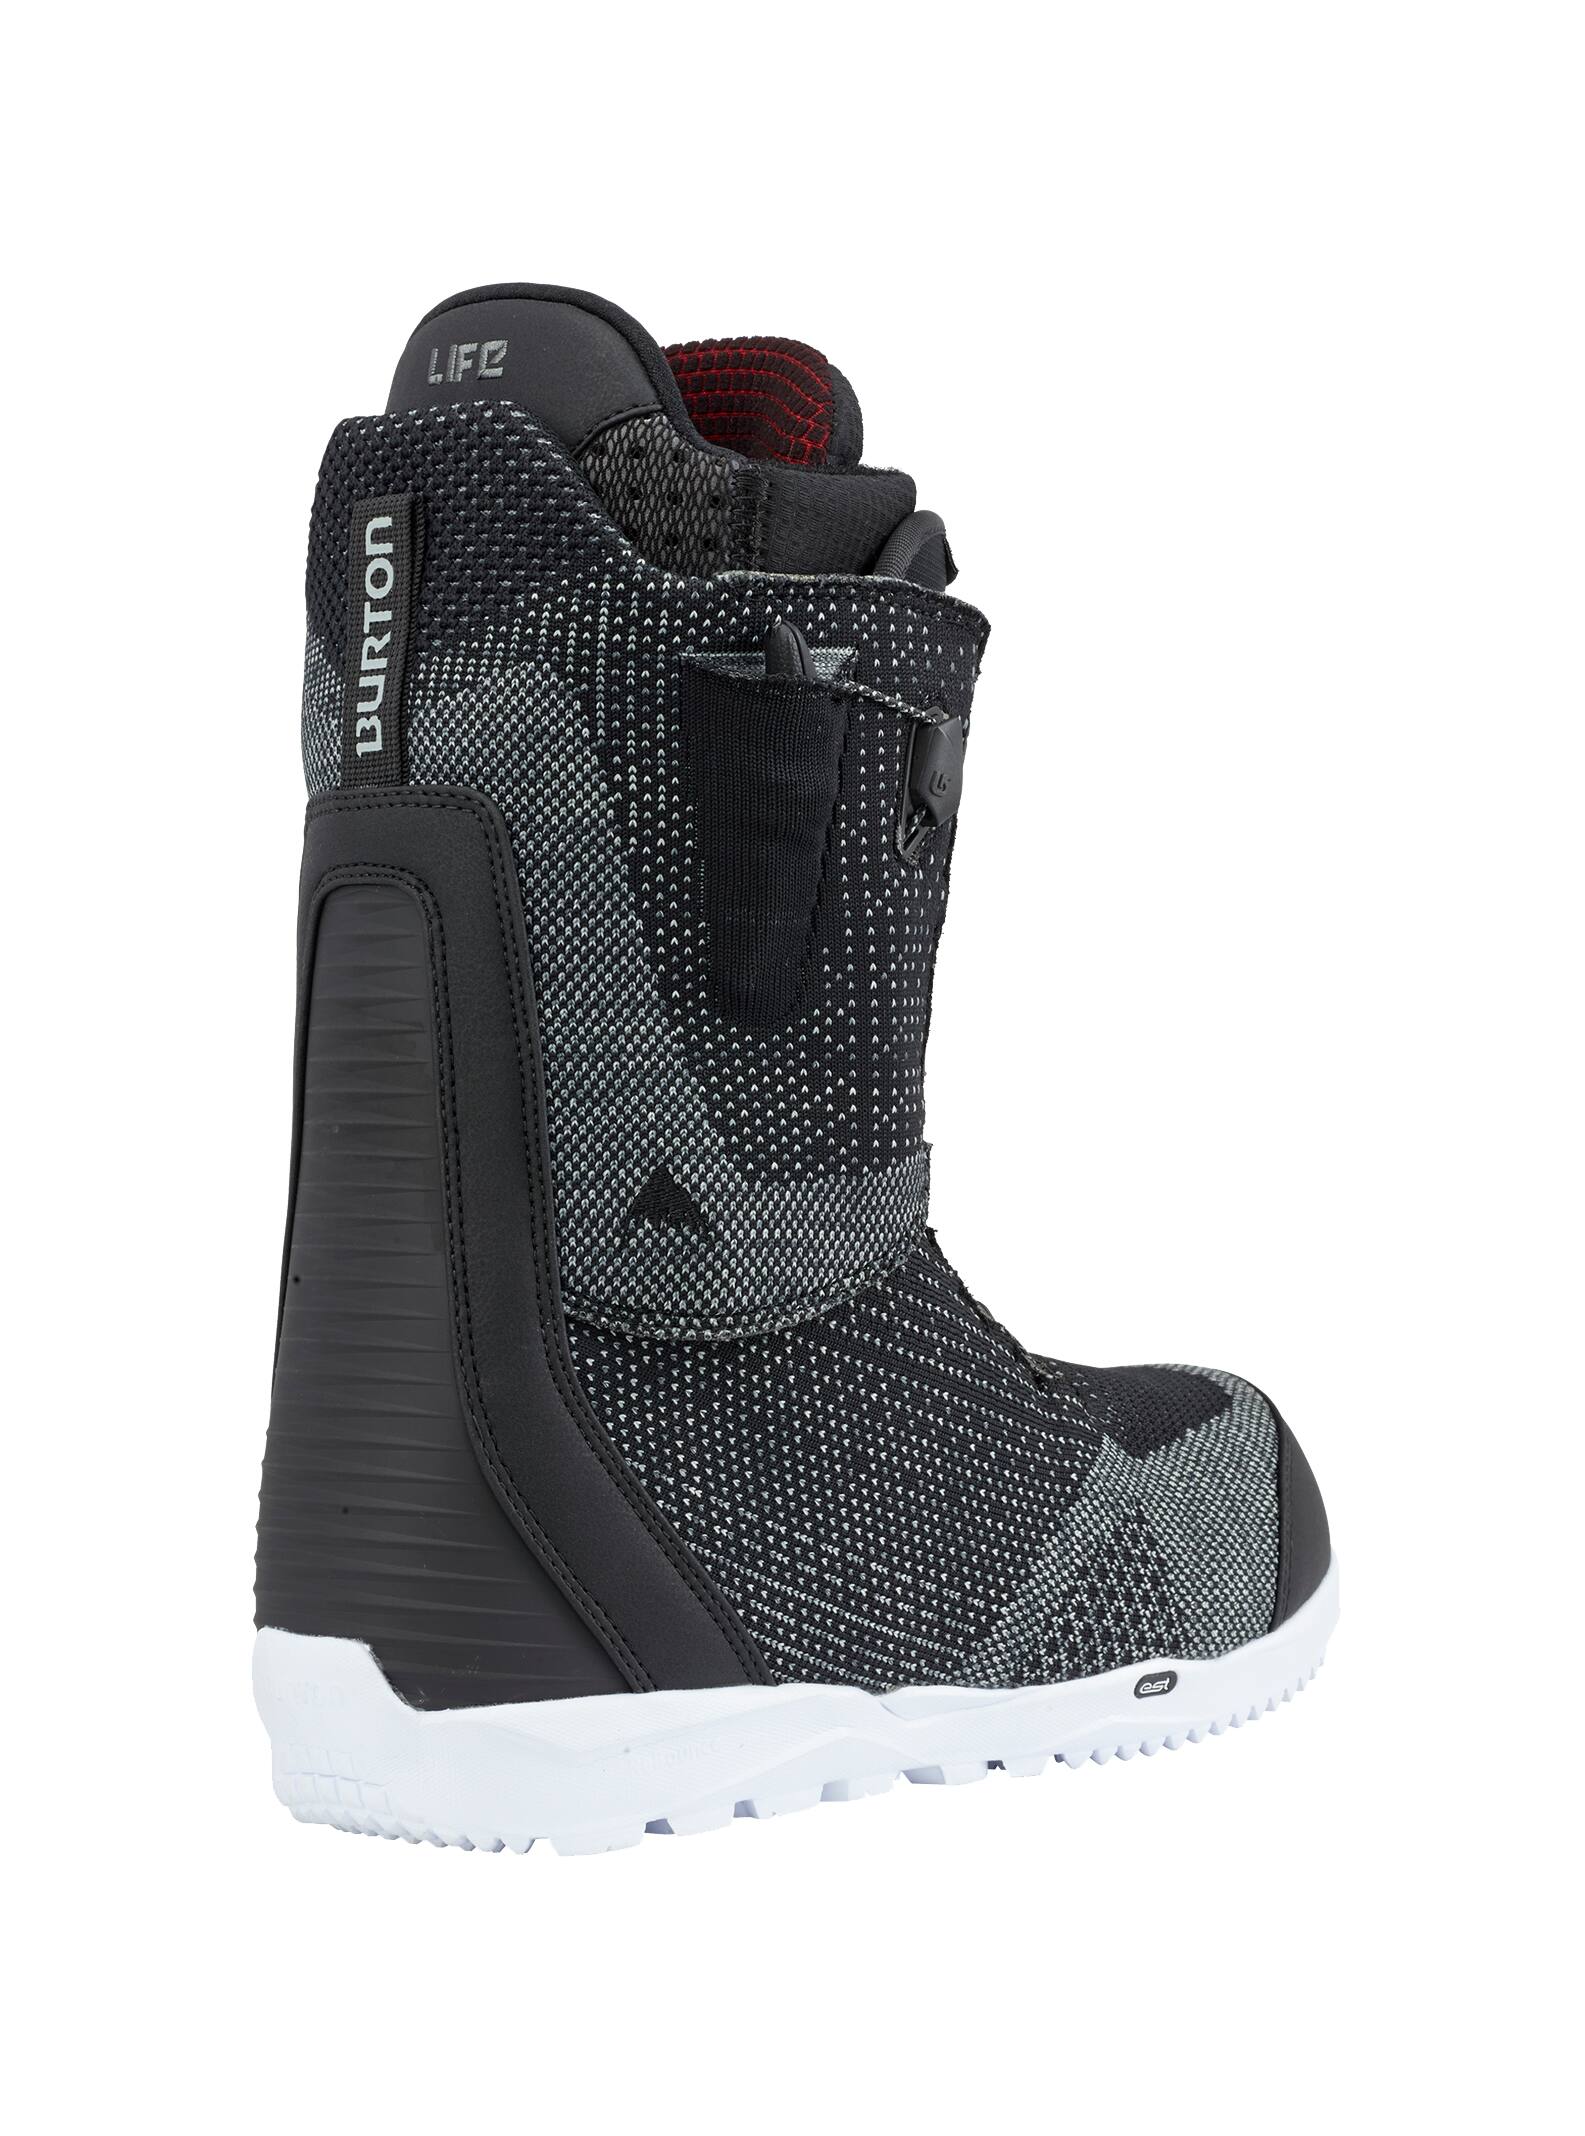 Forum Snowboard Boots Size Chart